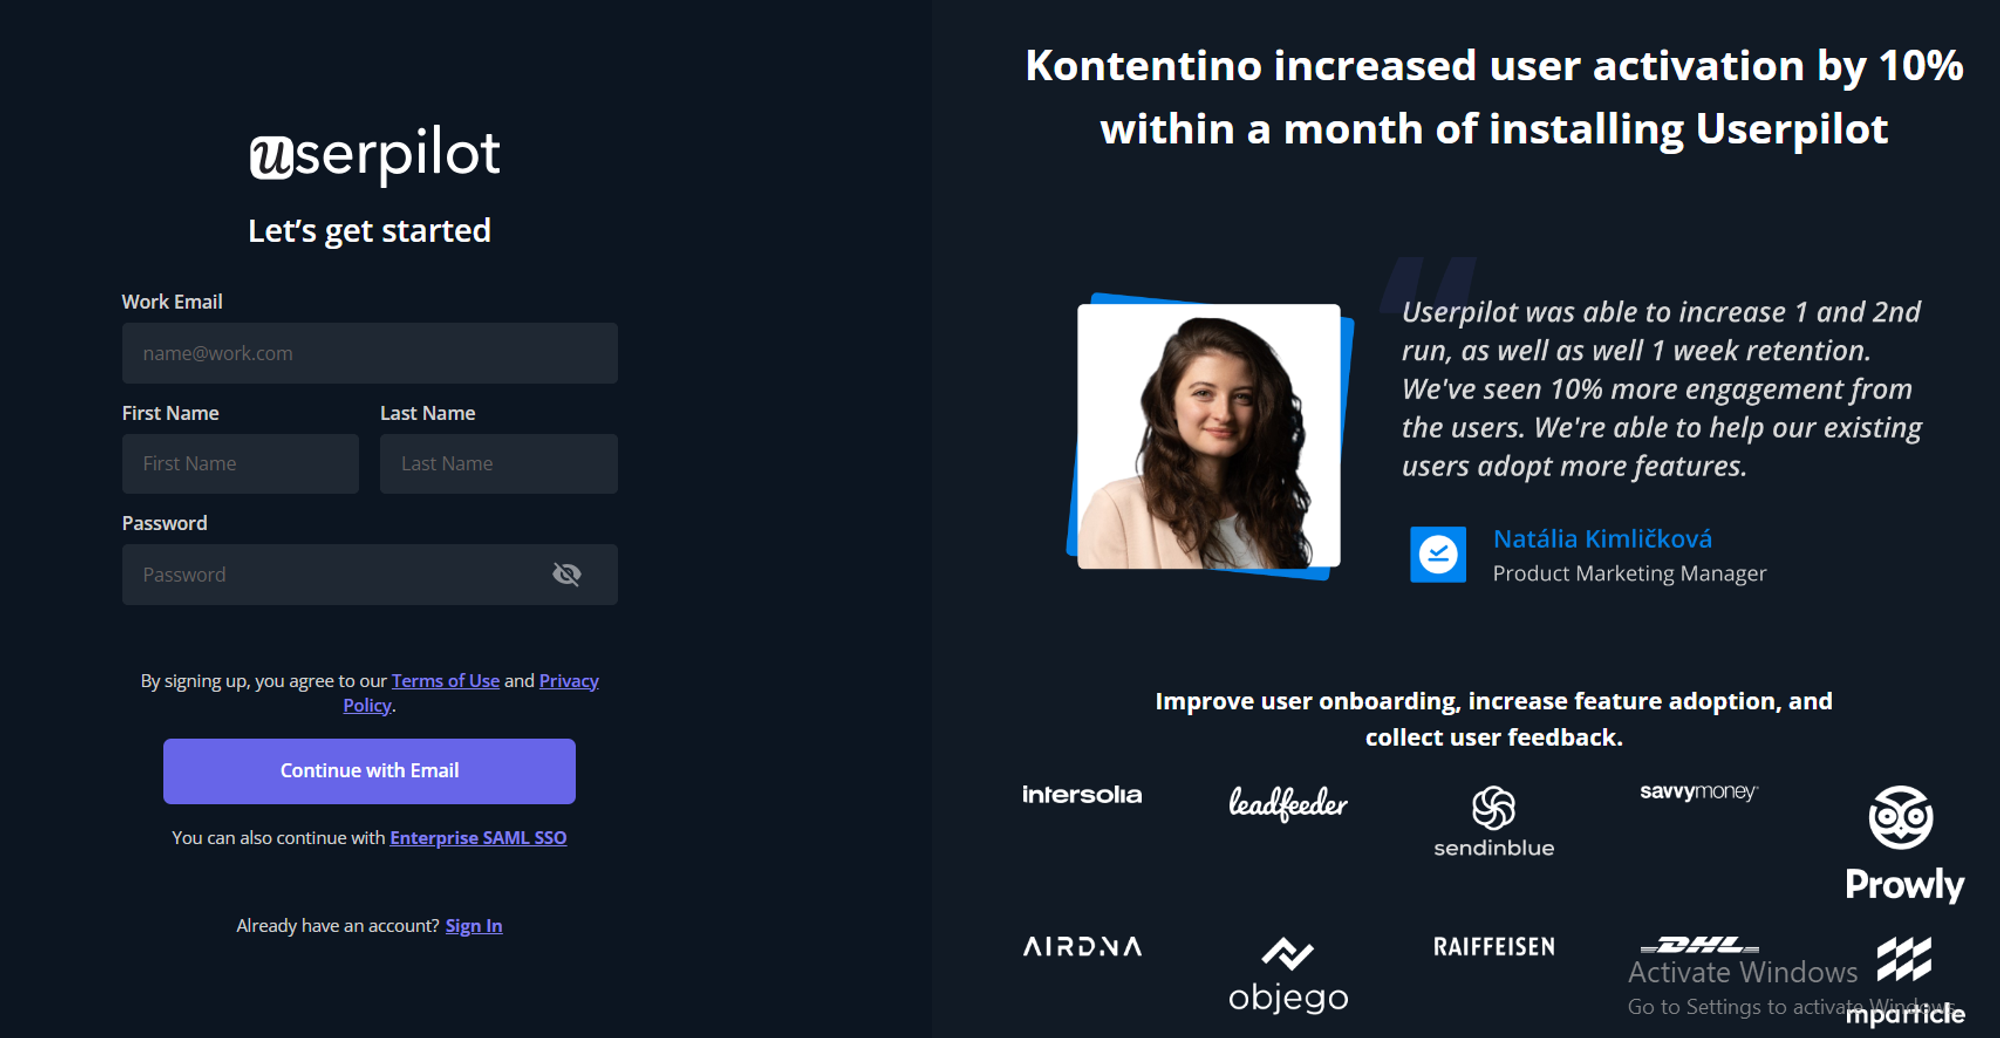 An example of adding social proof to user sign up as part of product activation rate optimization